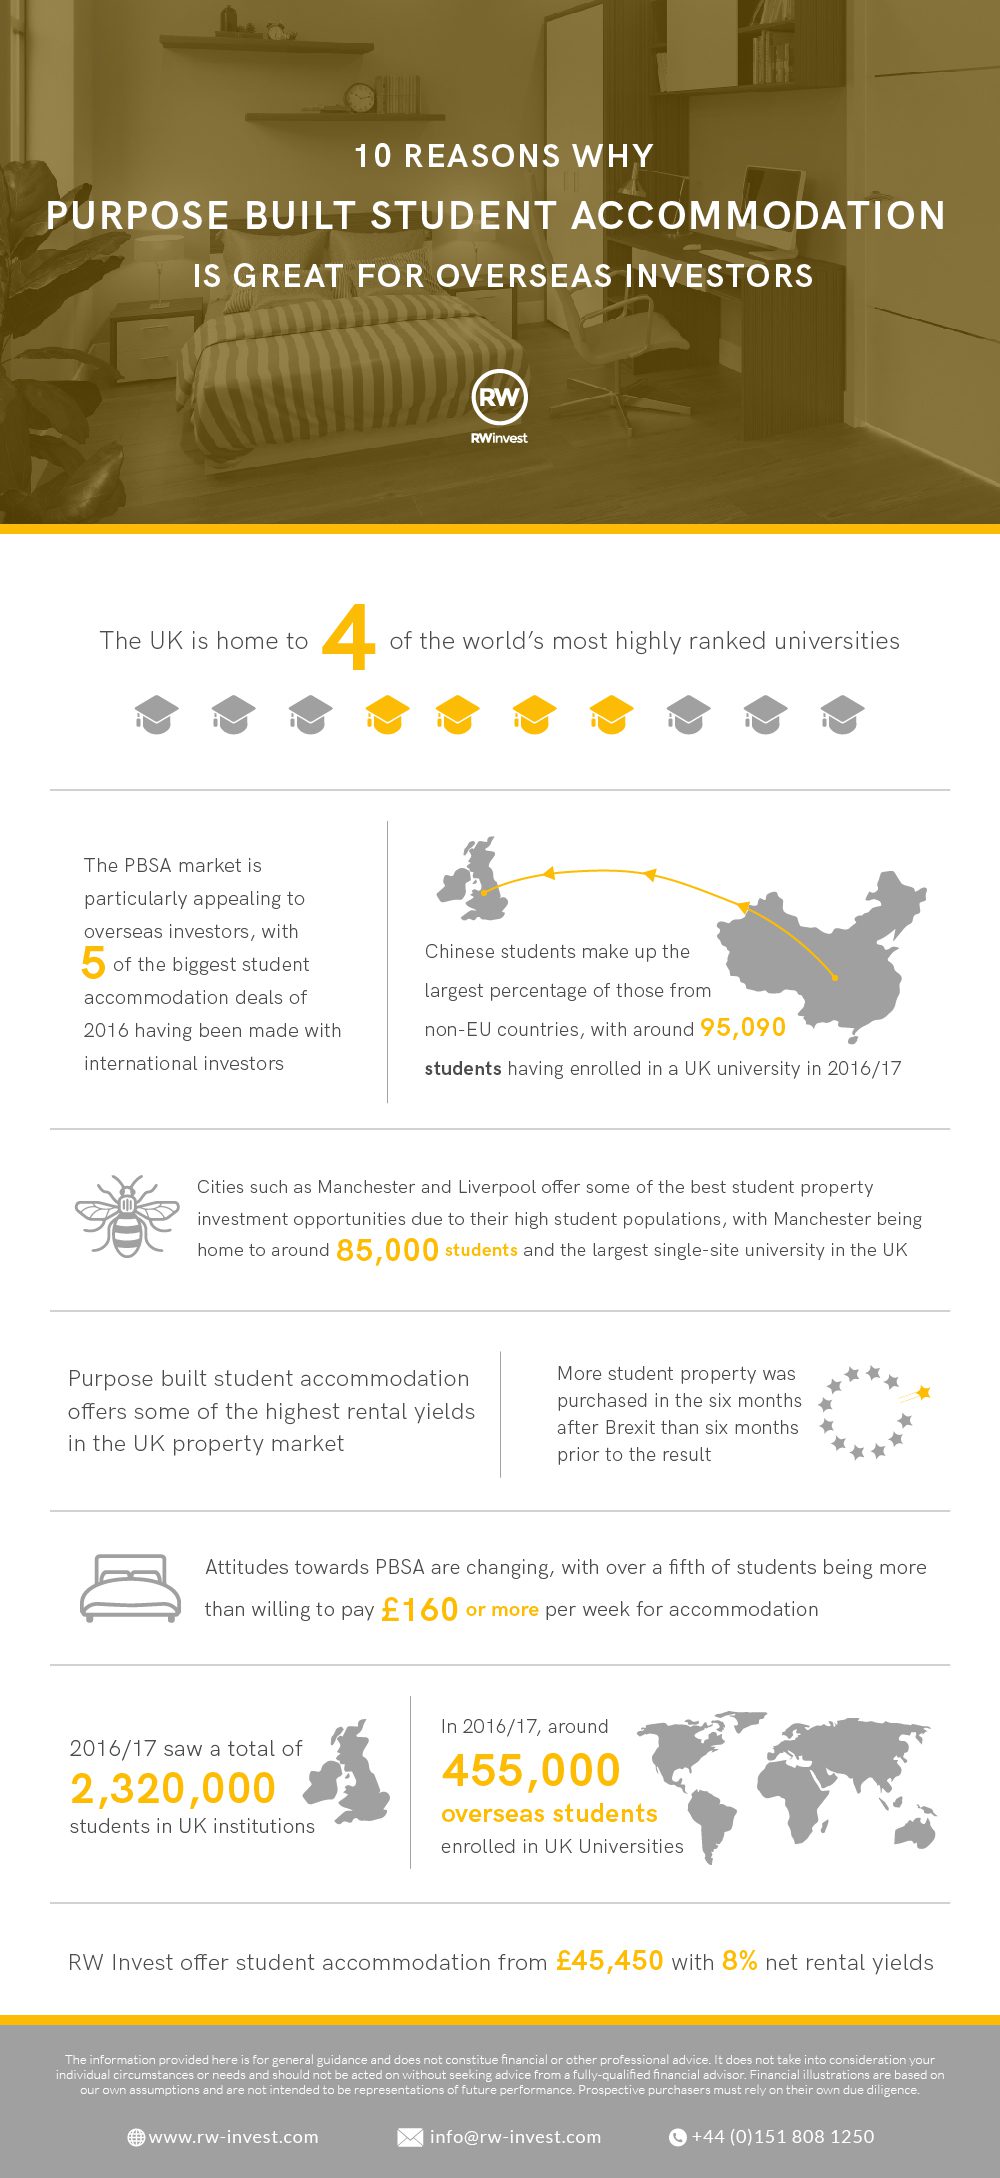 Why PBSA is Great for Overseas Investors infographic